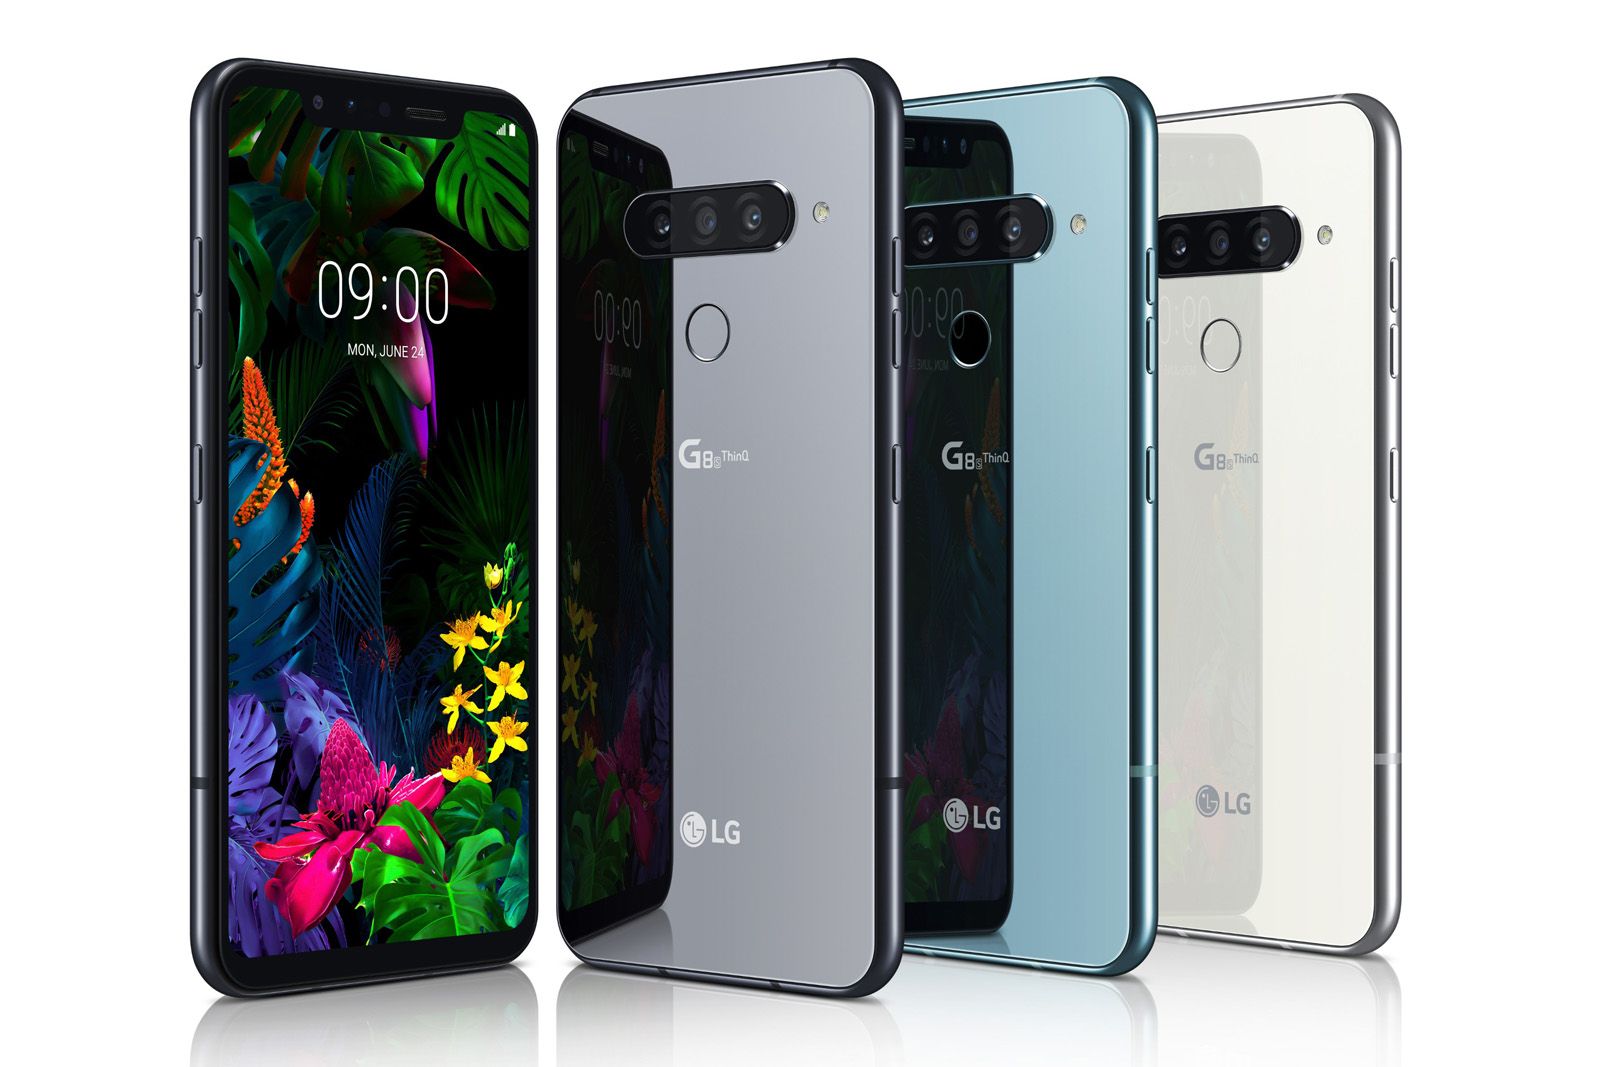 LG G8S ThinQ with triple rear camera Air Motion gestures and SD855 going on sale this month image 1